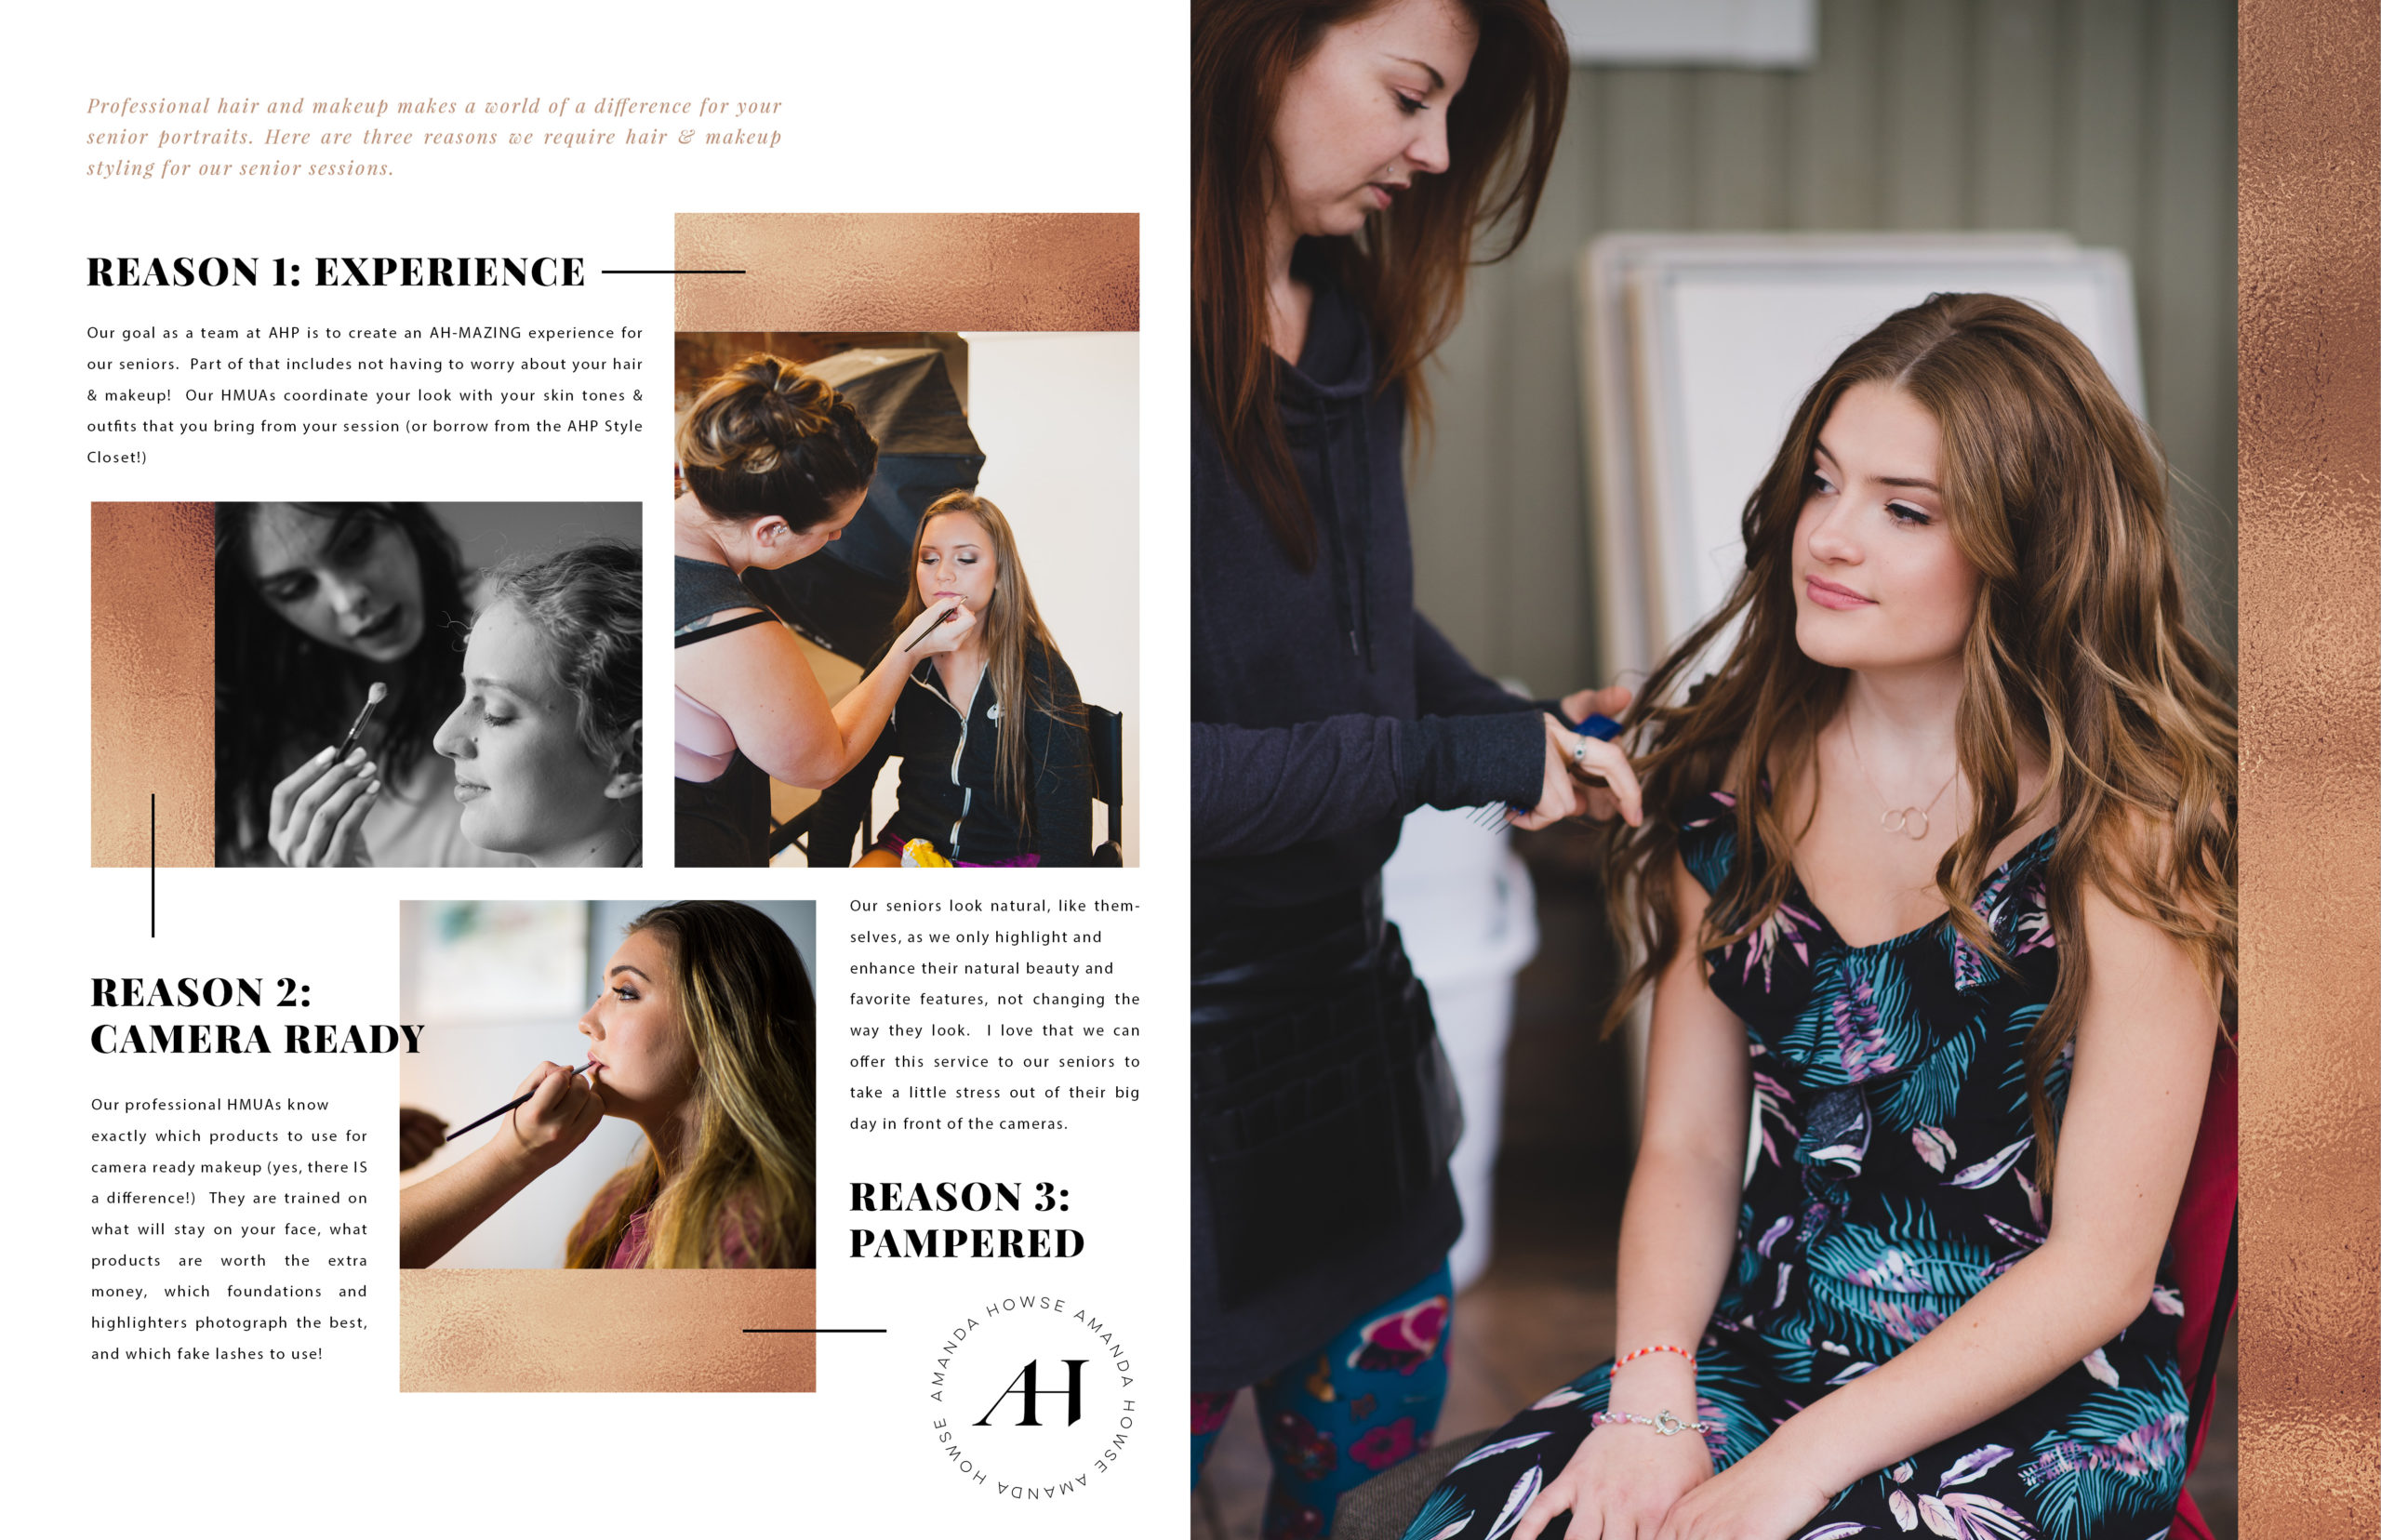 Reasons to Book Pro Hair and Makeup for Senior Portraits | The AHP Senior Experience | Photographed by the Best Tacoma Senior Photographer Amanda Howse 